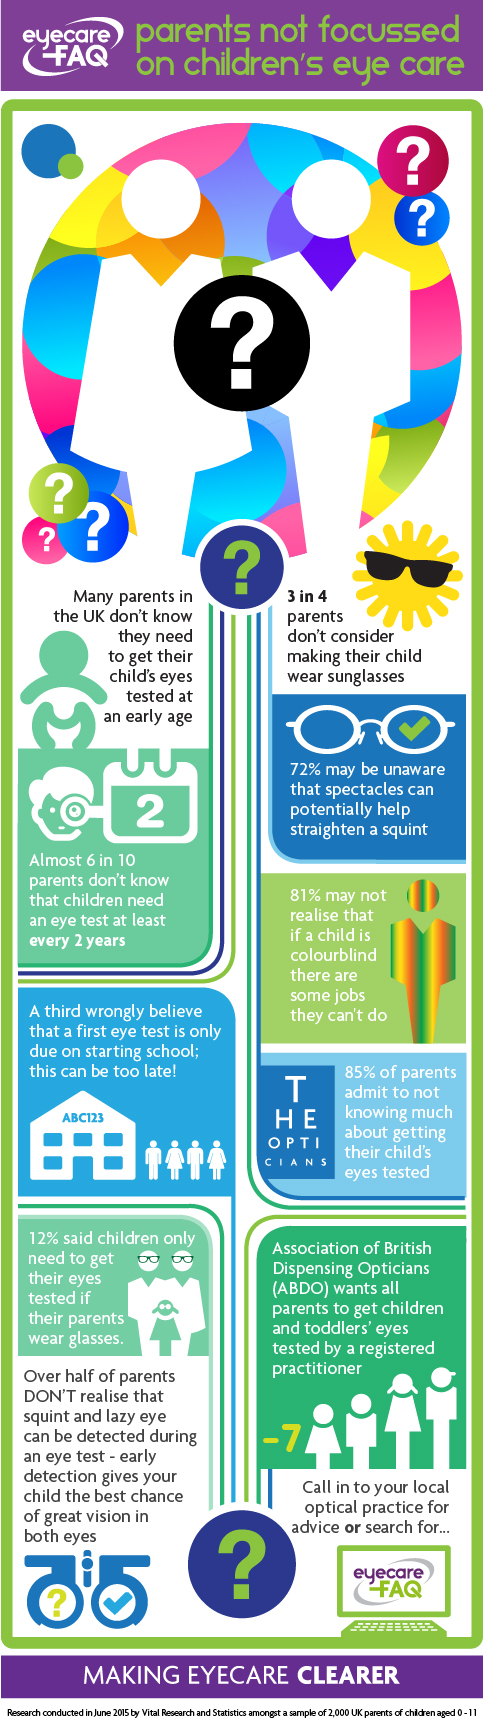 children's eye testing and care